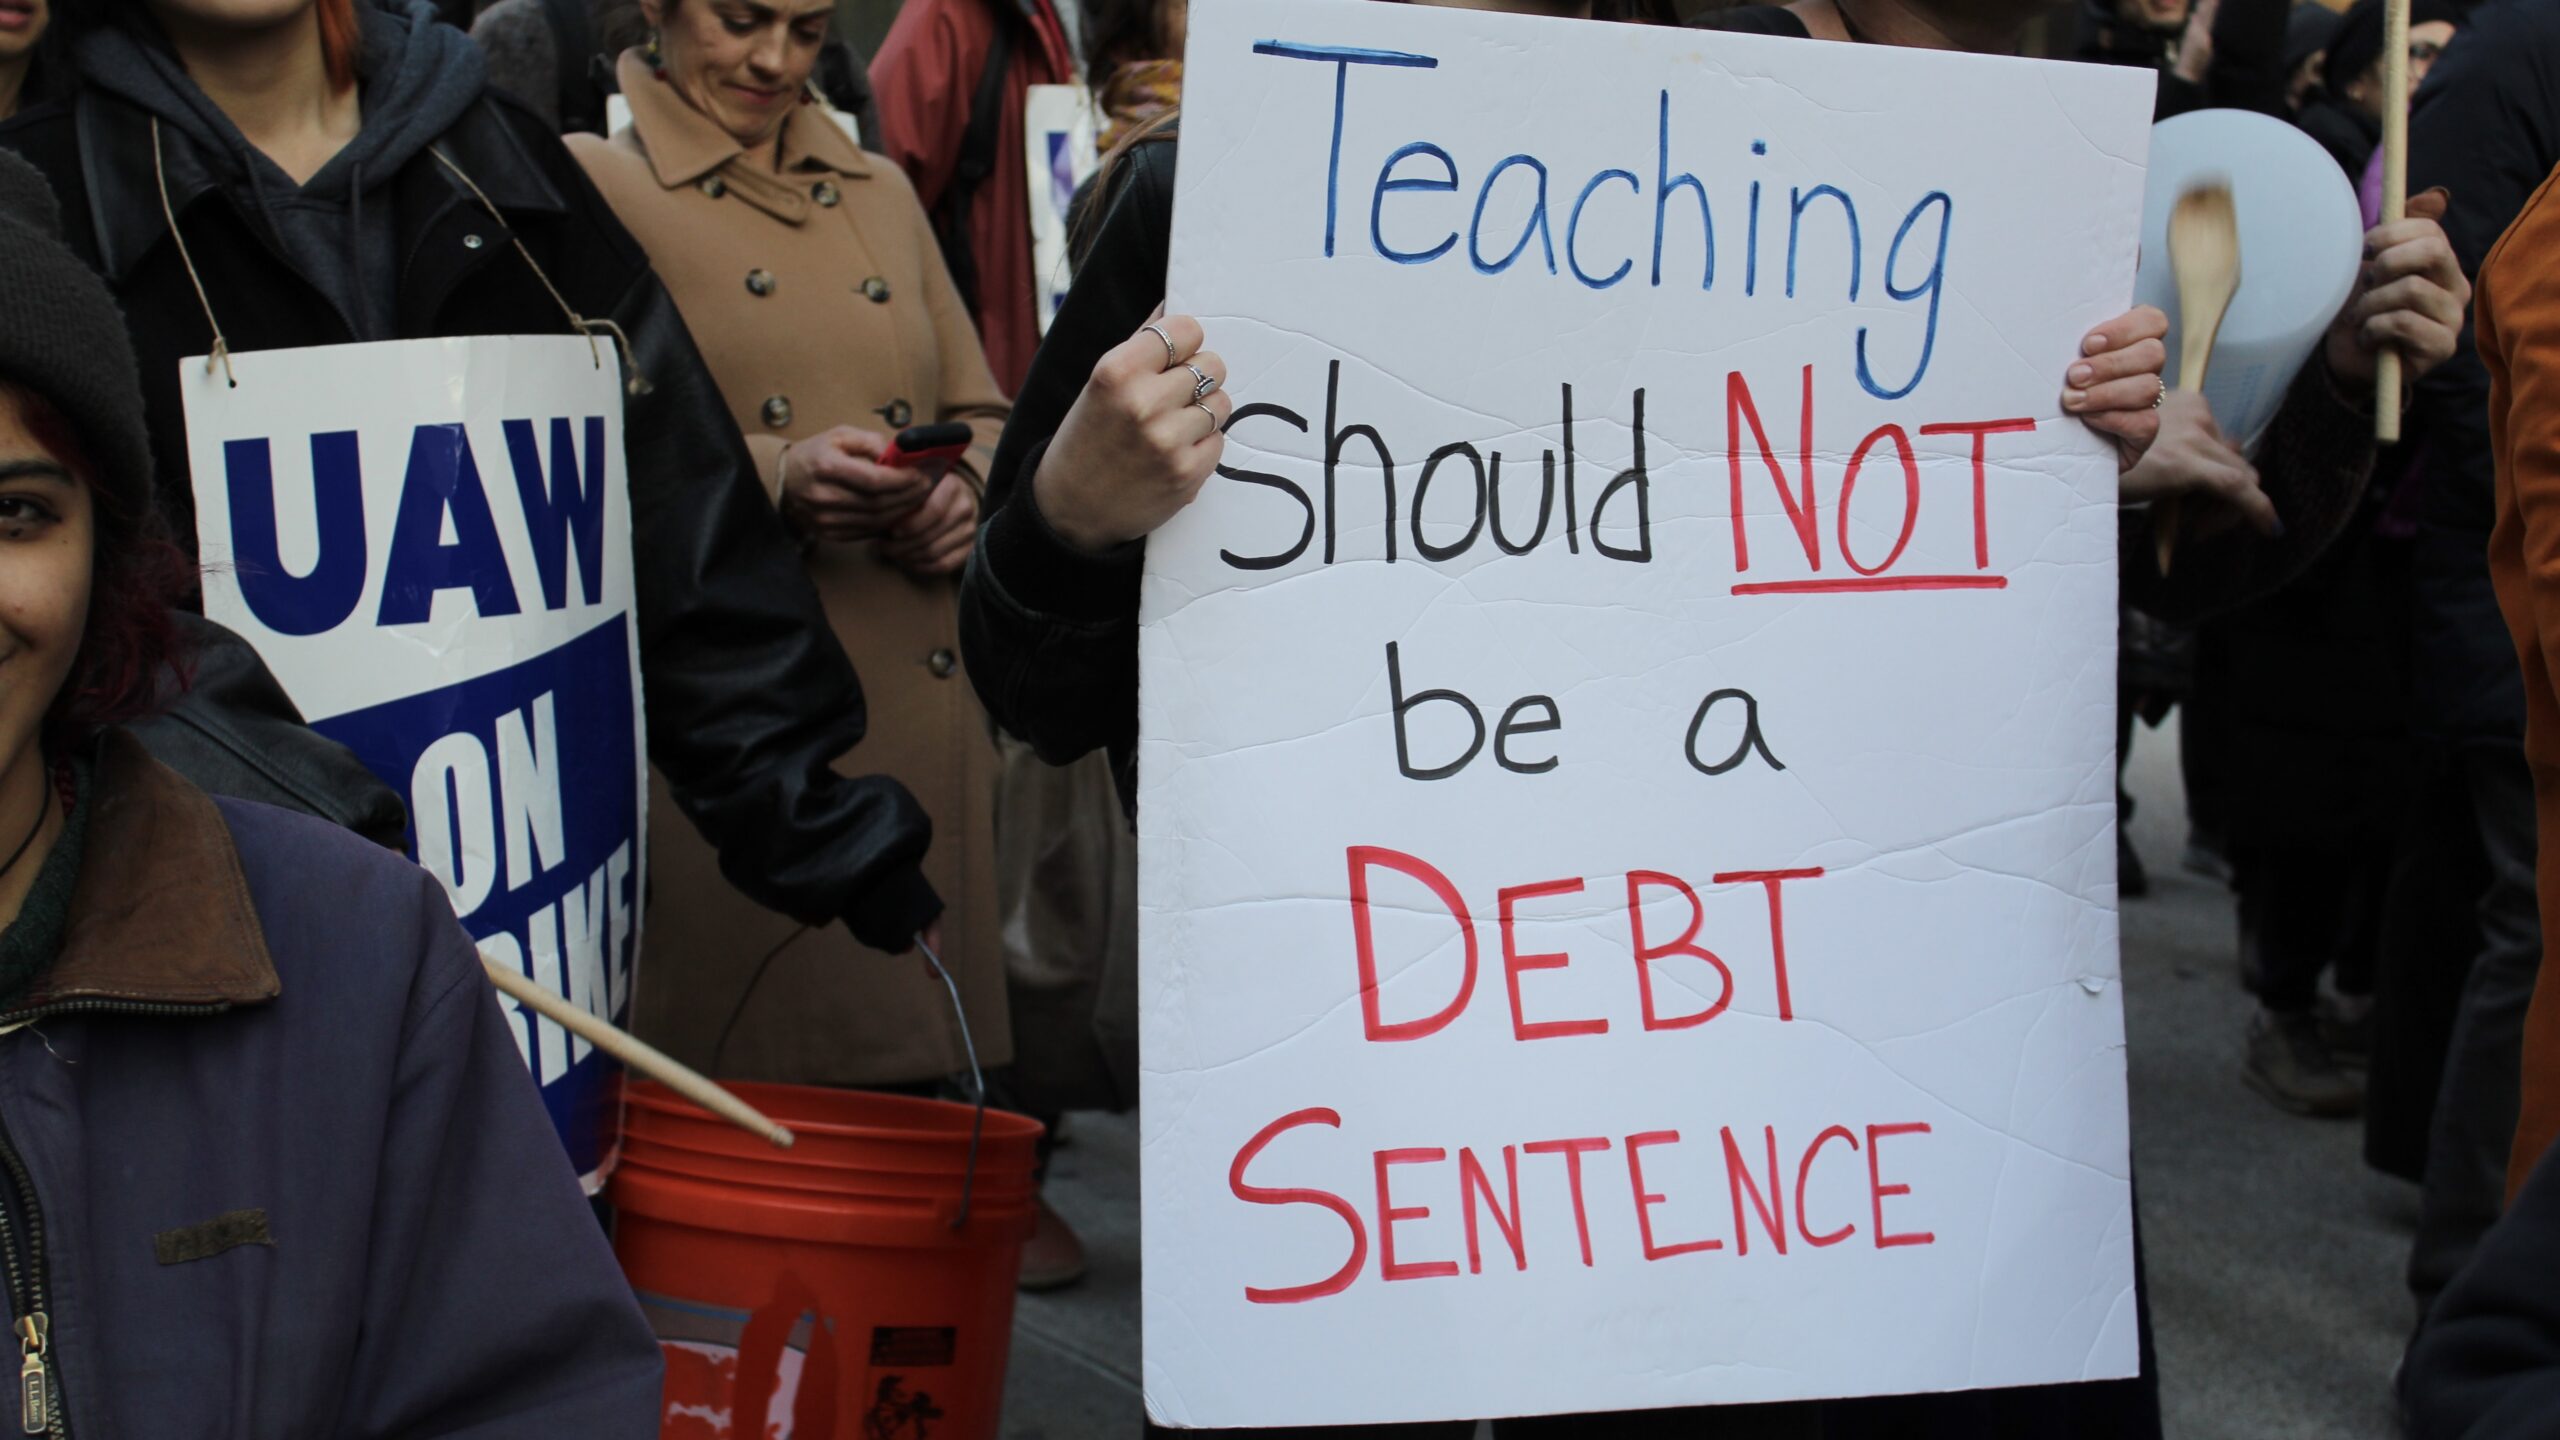 A sign held up by a protestor in front of The New School’s university center saying “Teaching should not be a debt sentence”.